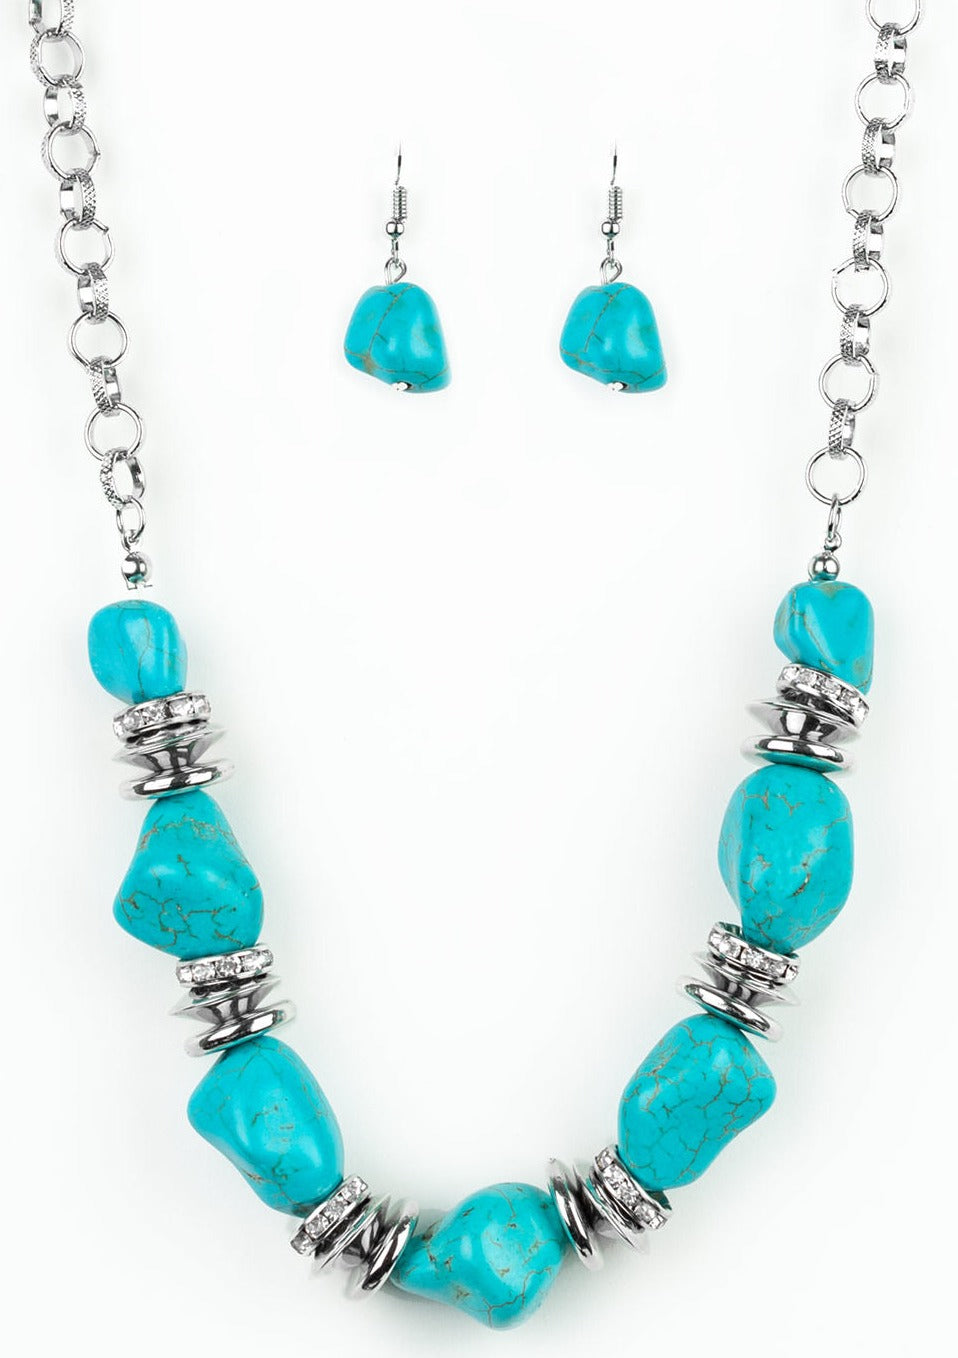 Stunningly Stone Age - Blue - TKT’s Jewelry & Accessories 